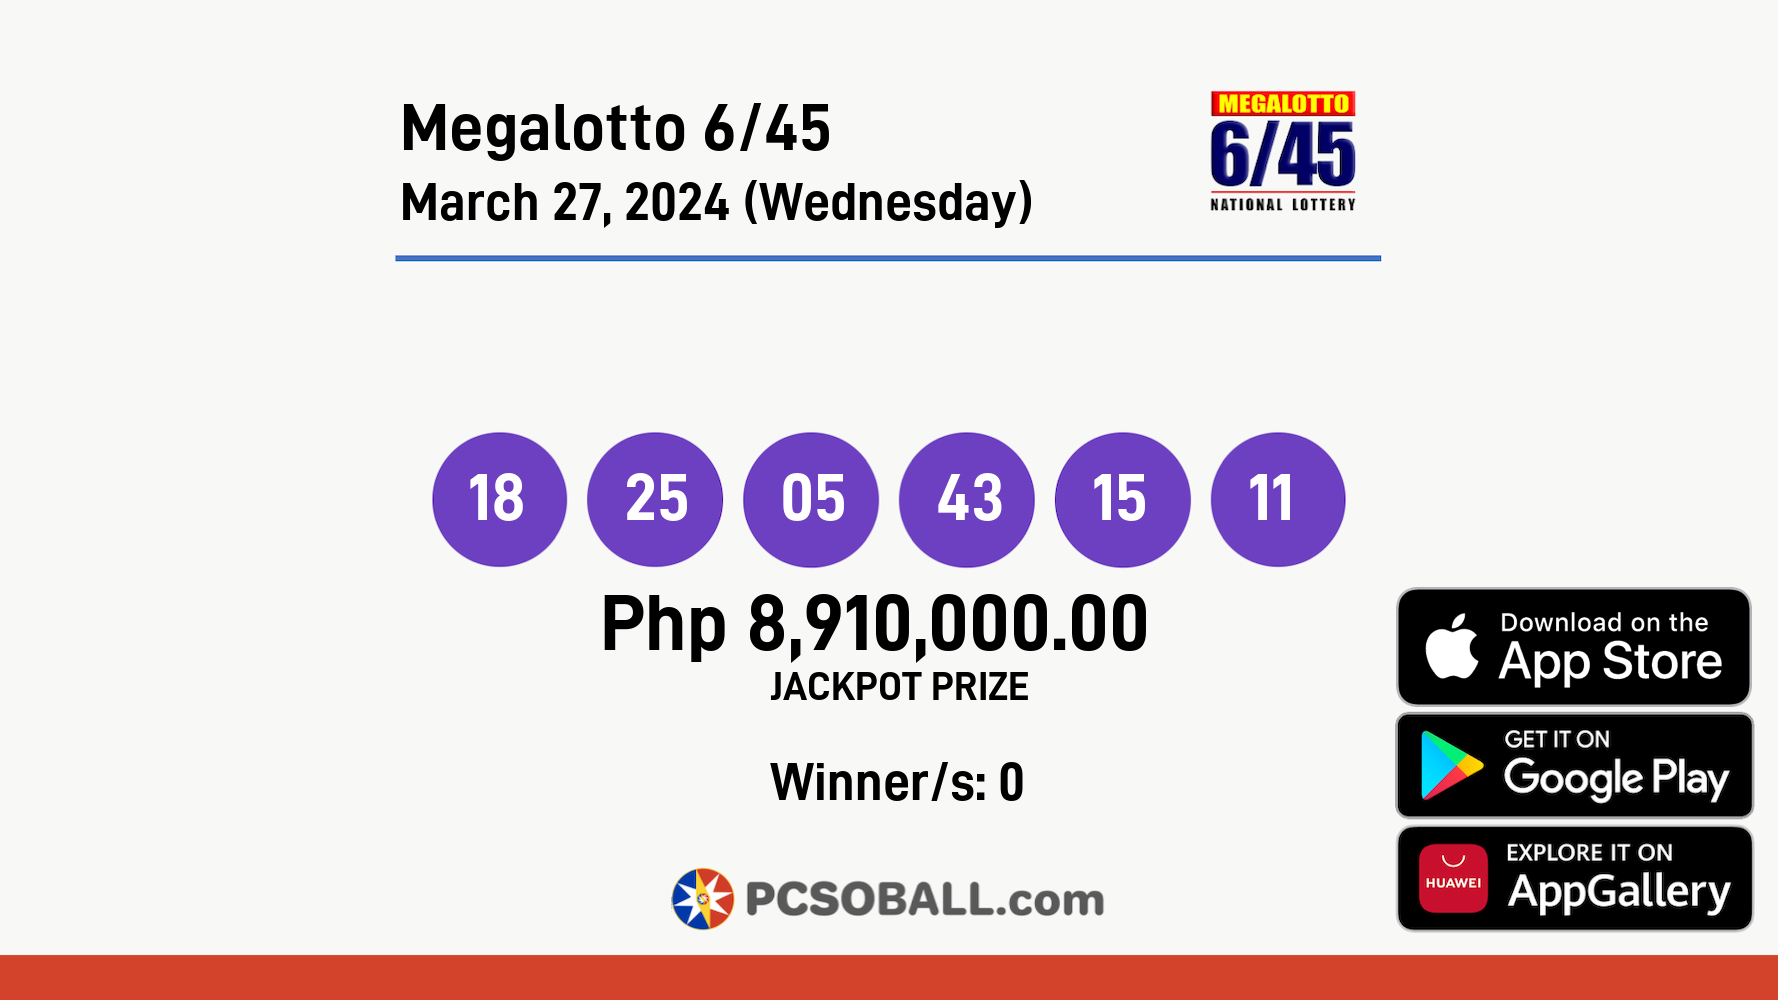 Megalotto 6/45 March 27, 2024 (Wednesday) Result